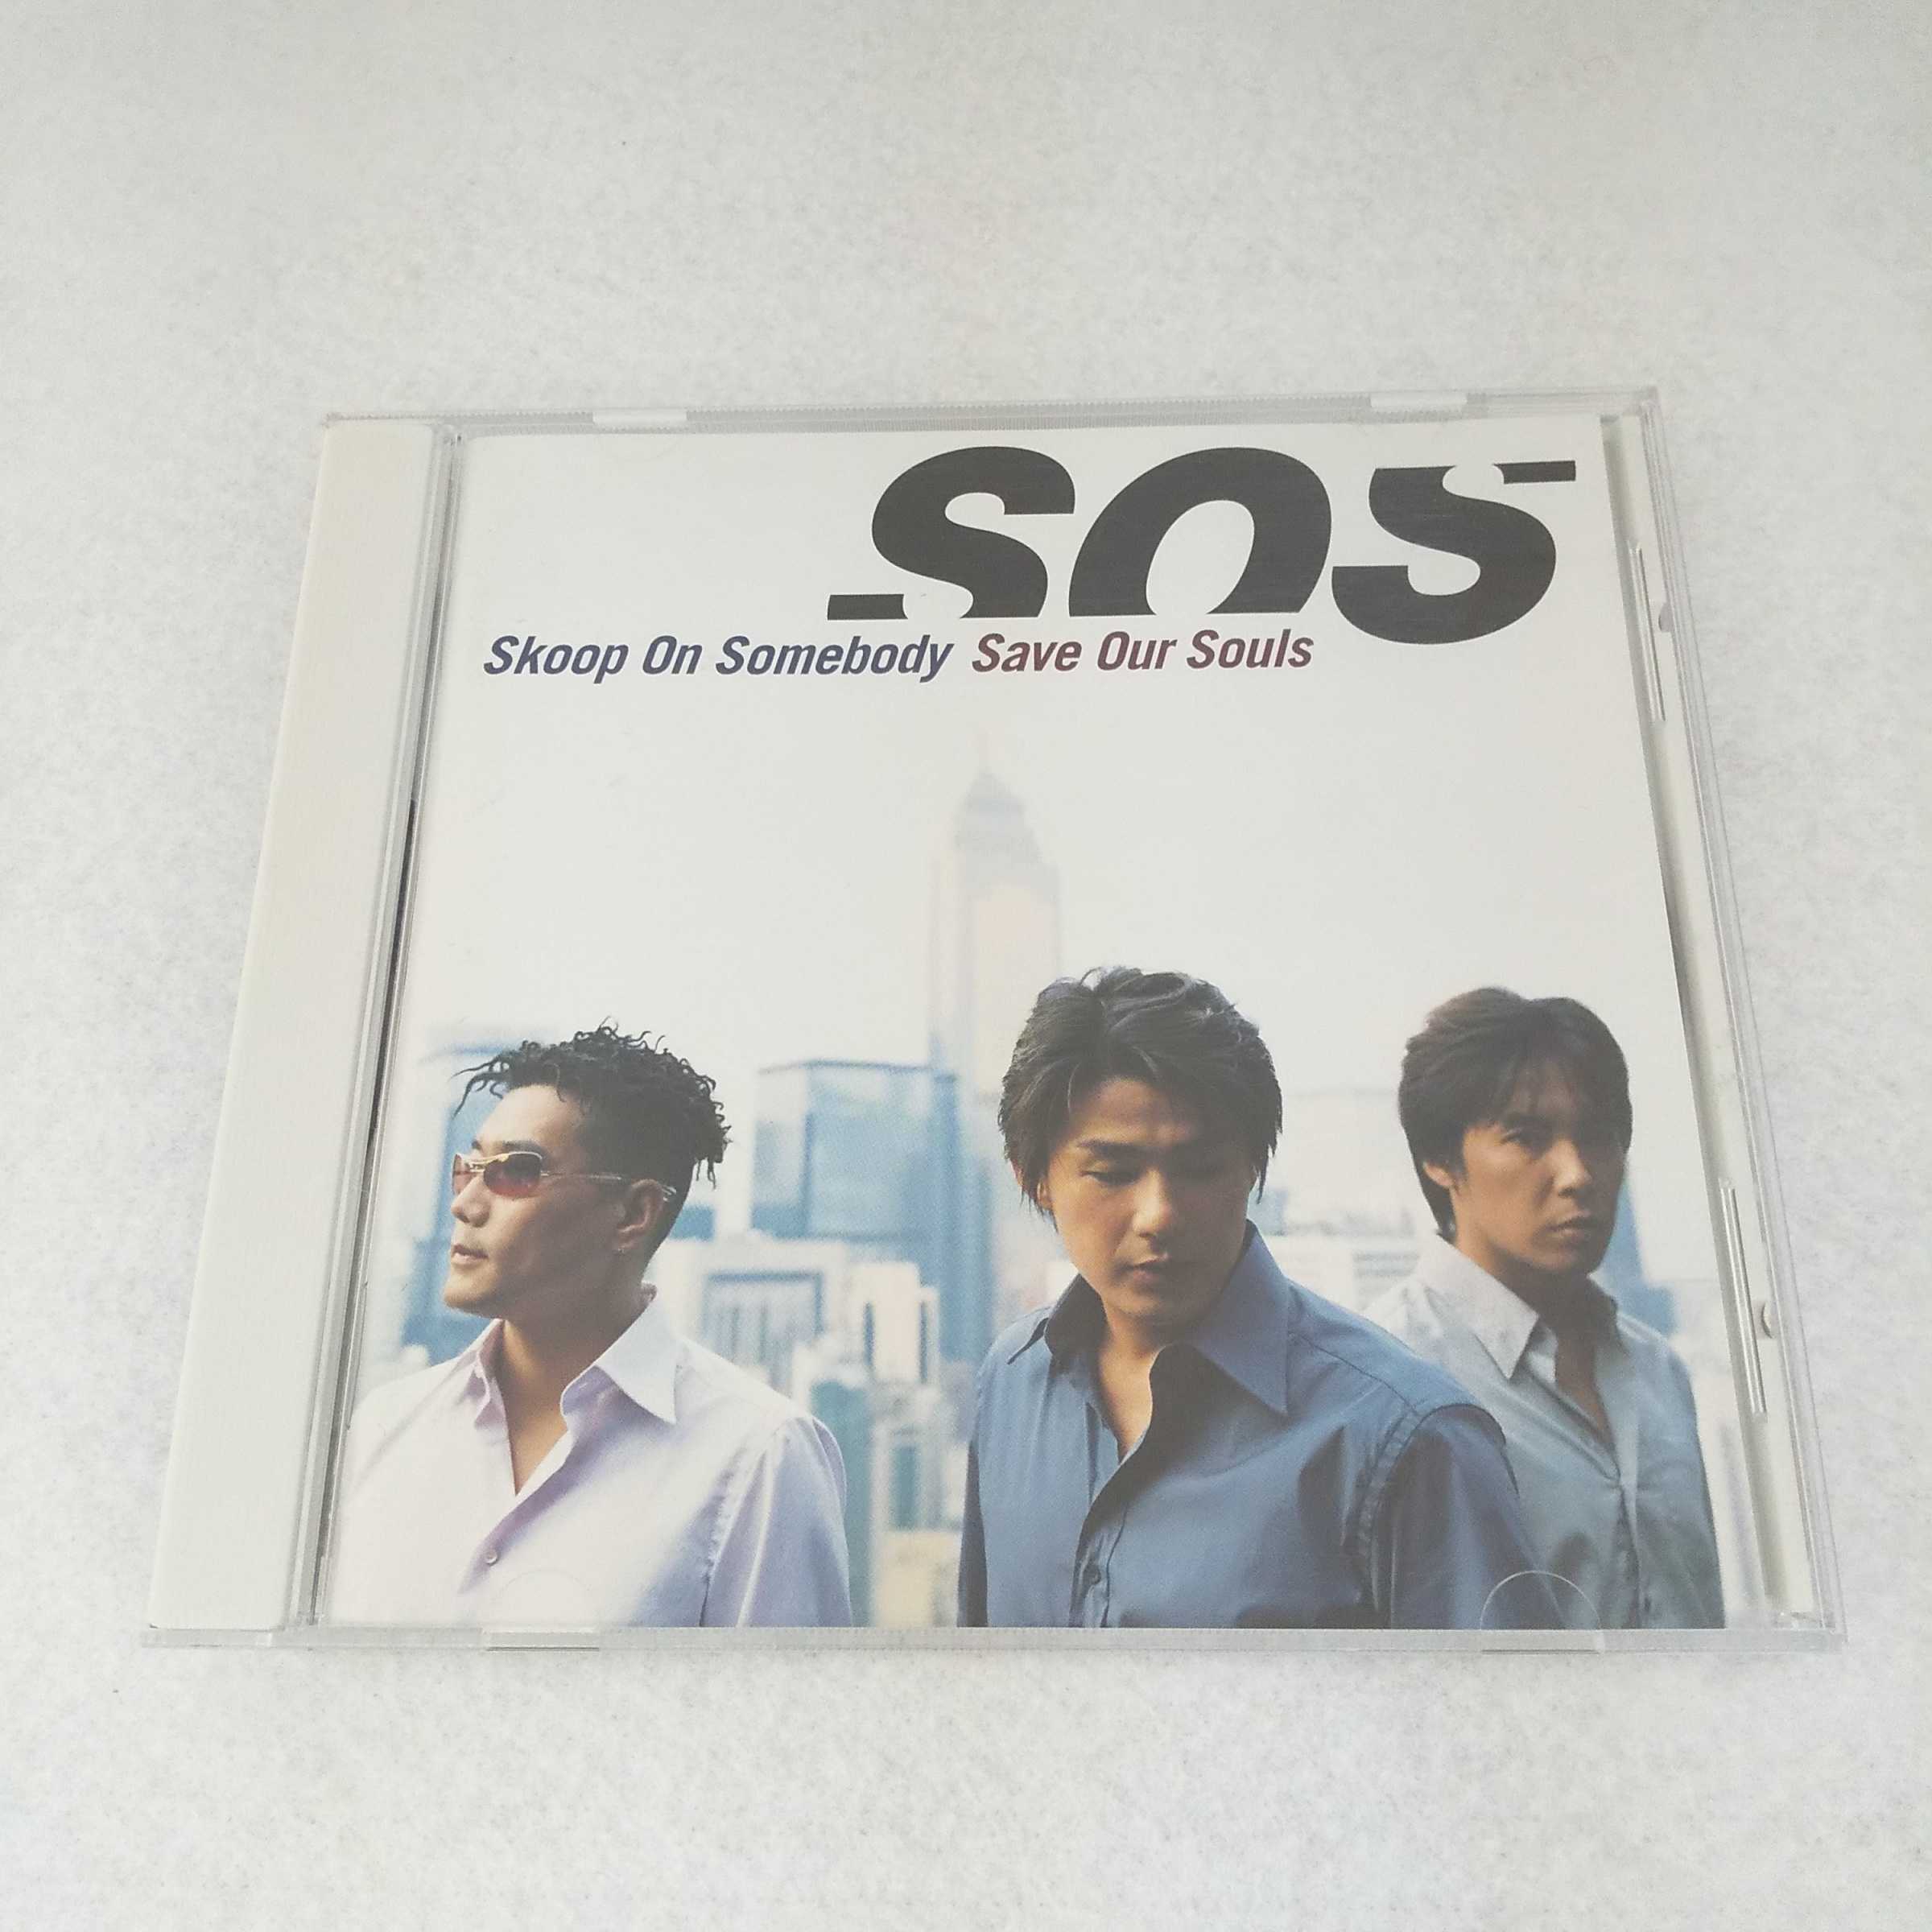 AC10631 【中古】 【CD】 Save Our Souls/Skoop On Somebody